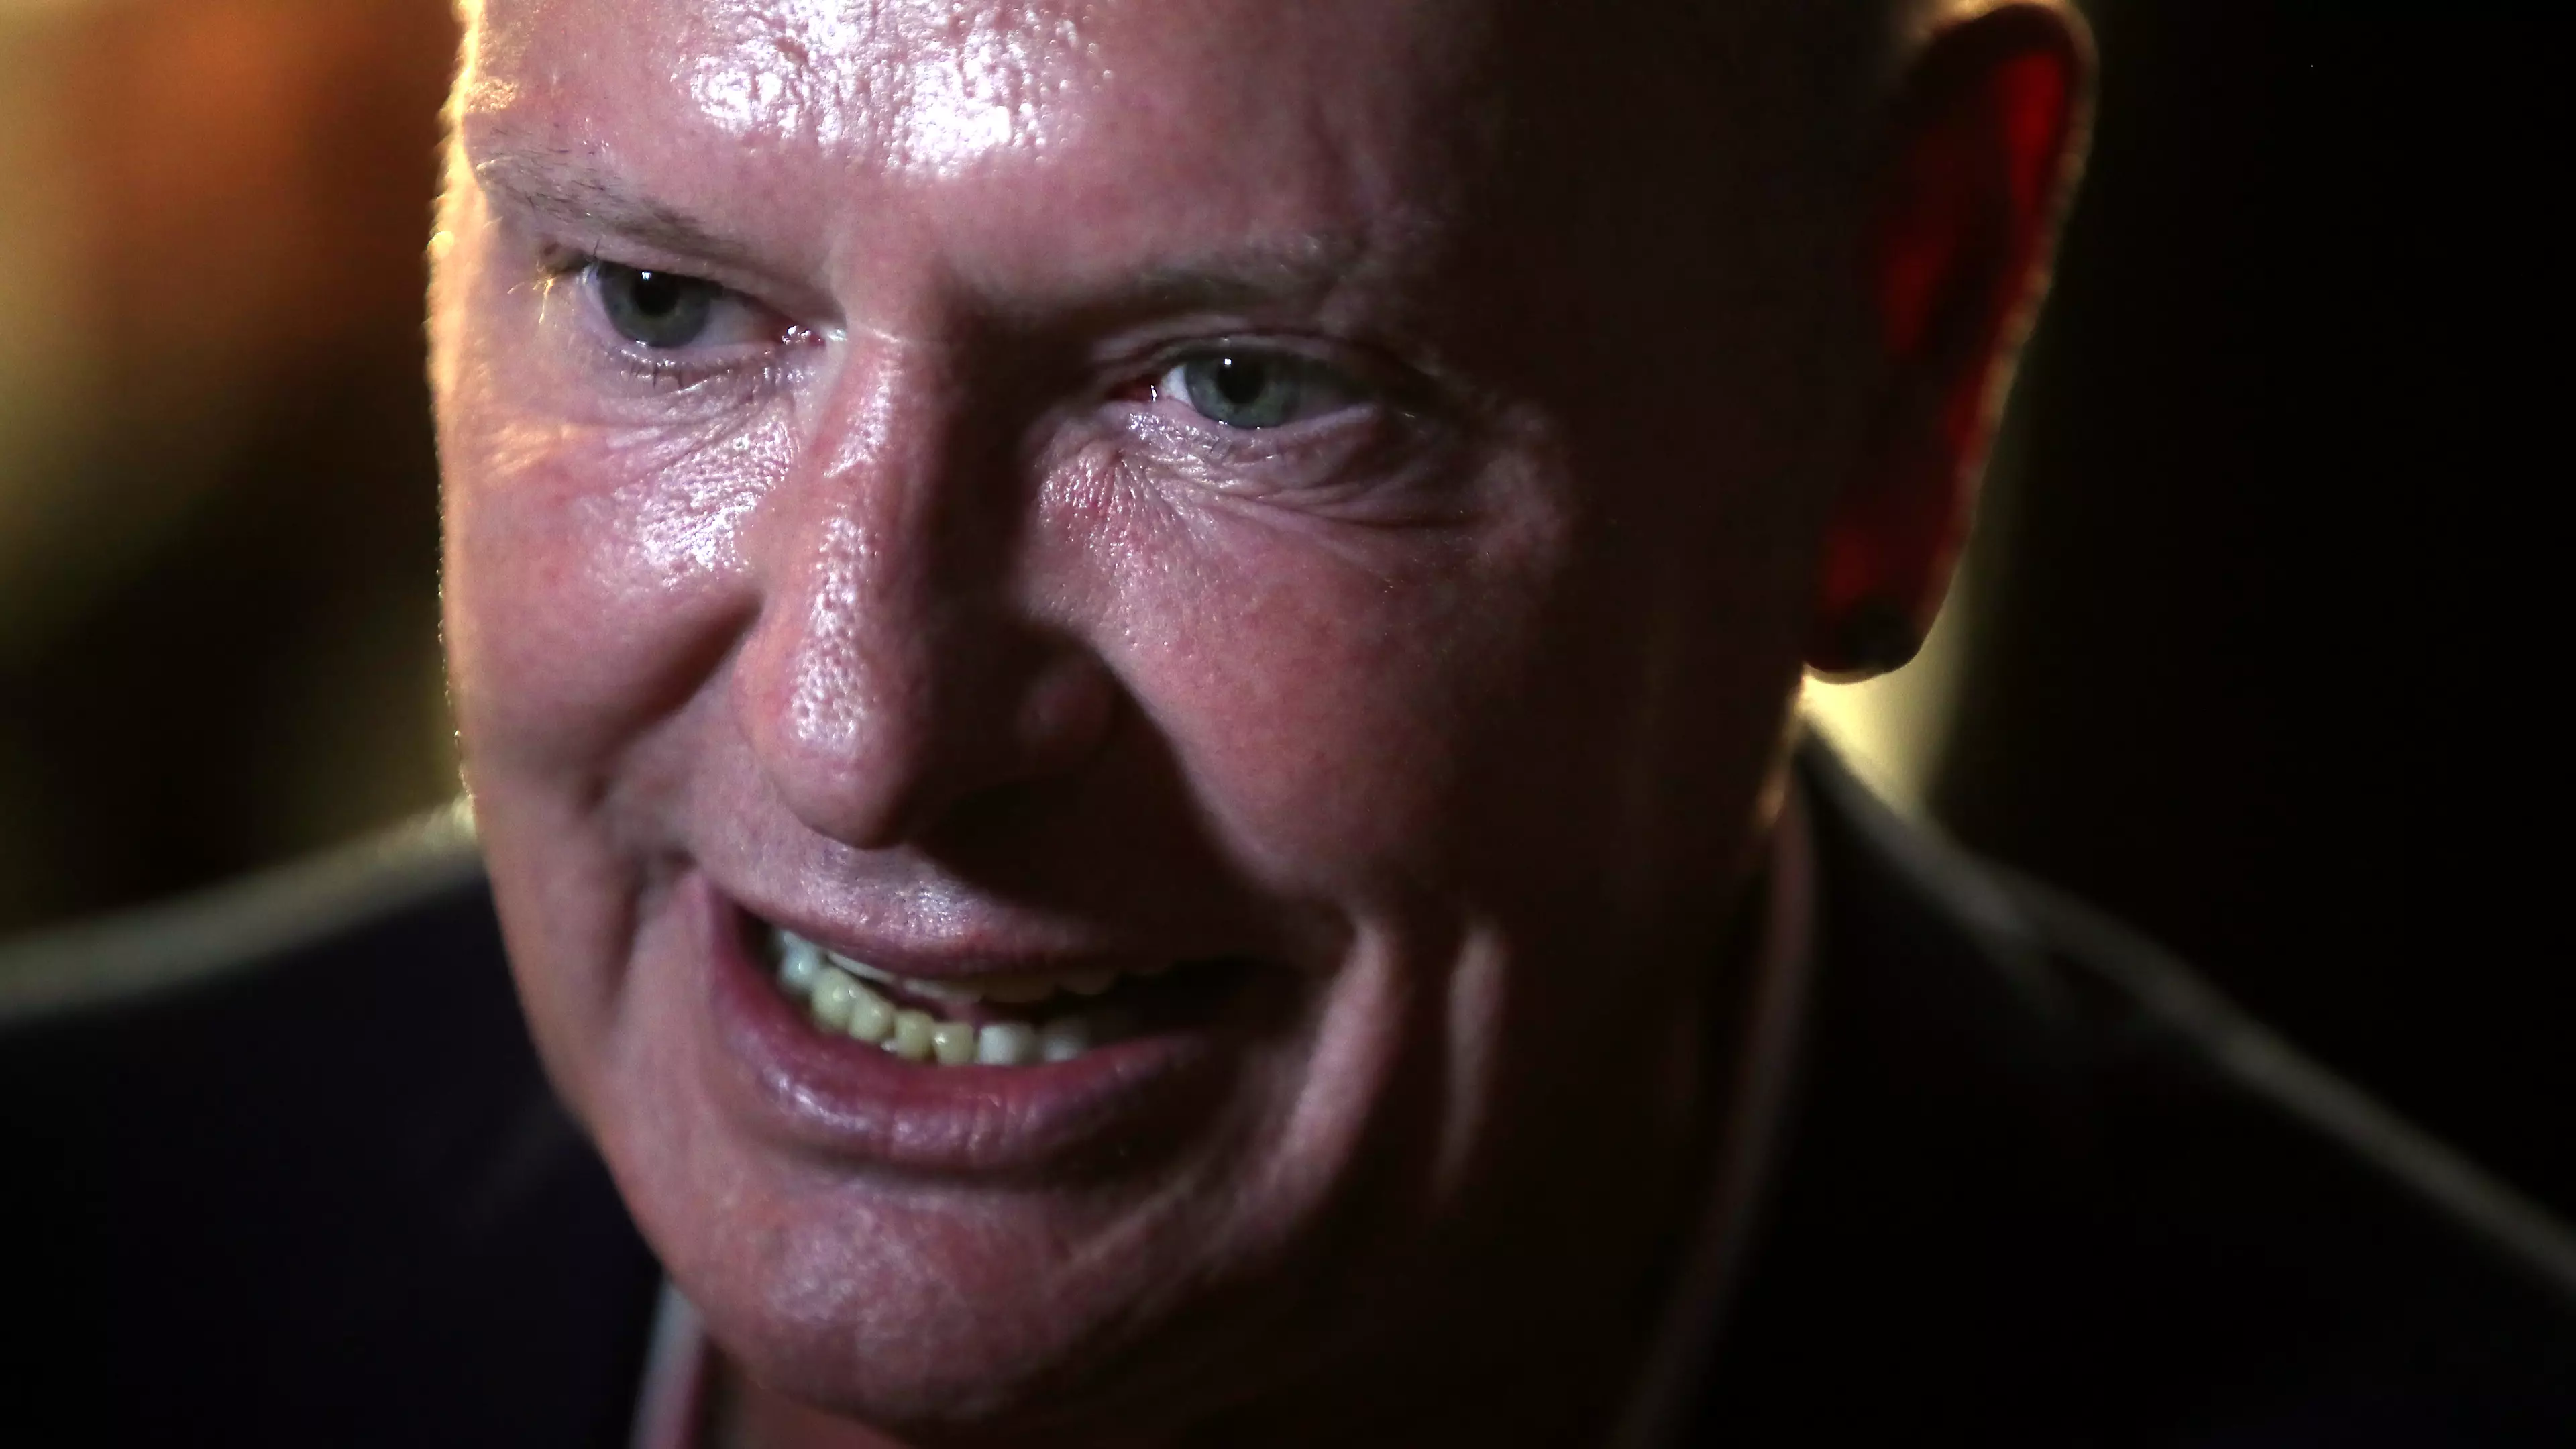 Paul Gascoigne Has Been Charged With Sexual Assault, Reports Suggest